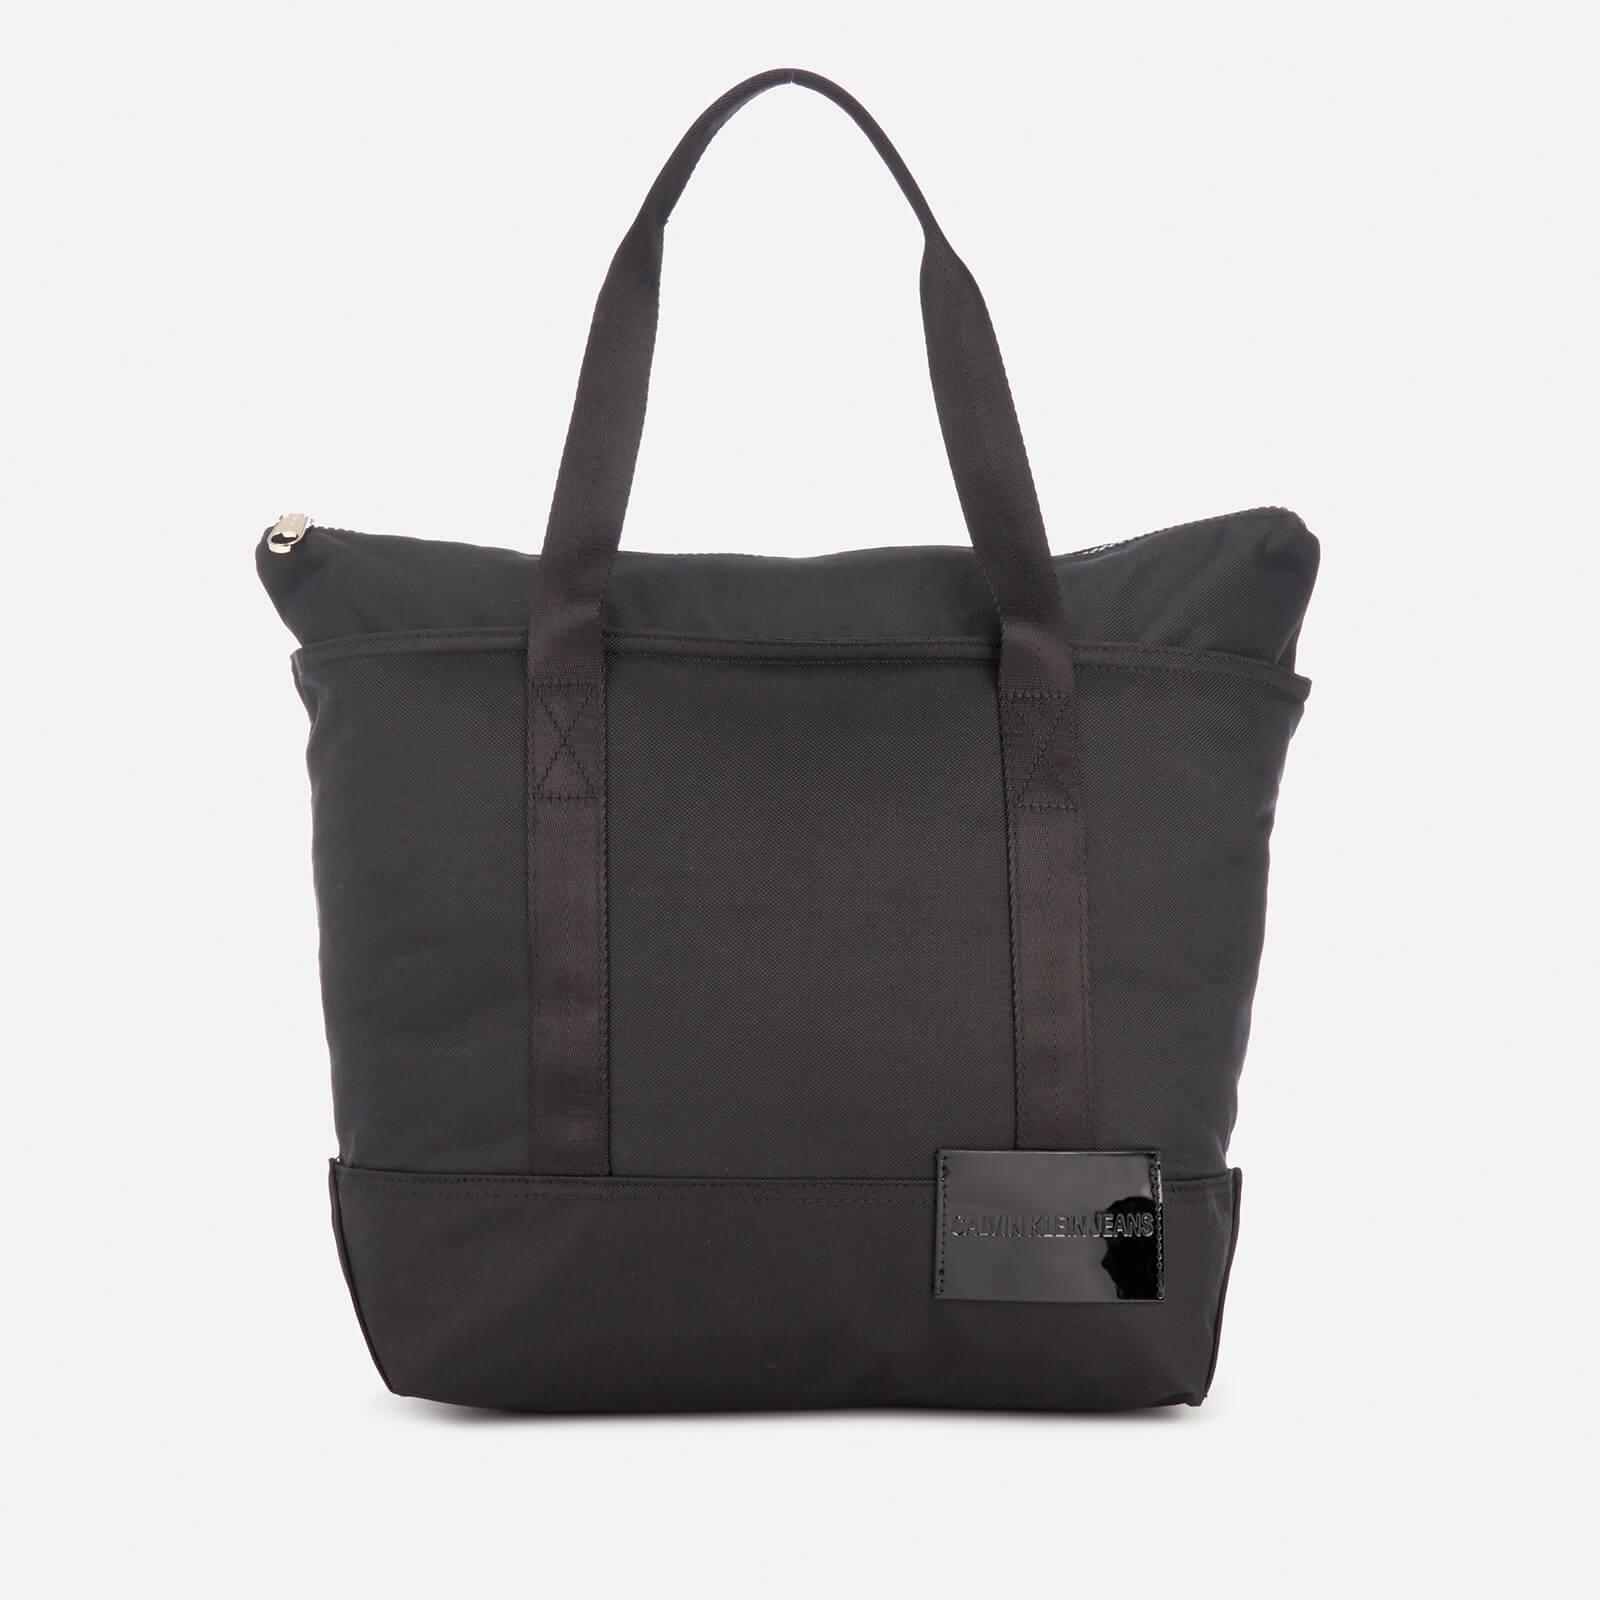 Lyst - Calvin Klein Sport Essential Carry All Tote Bag in Black